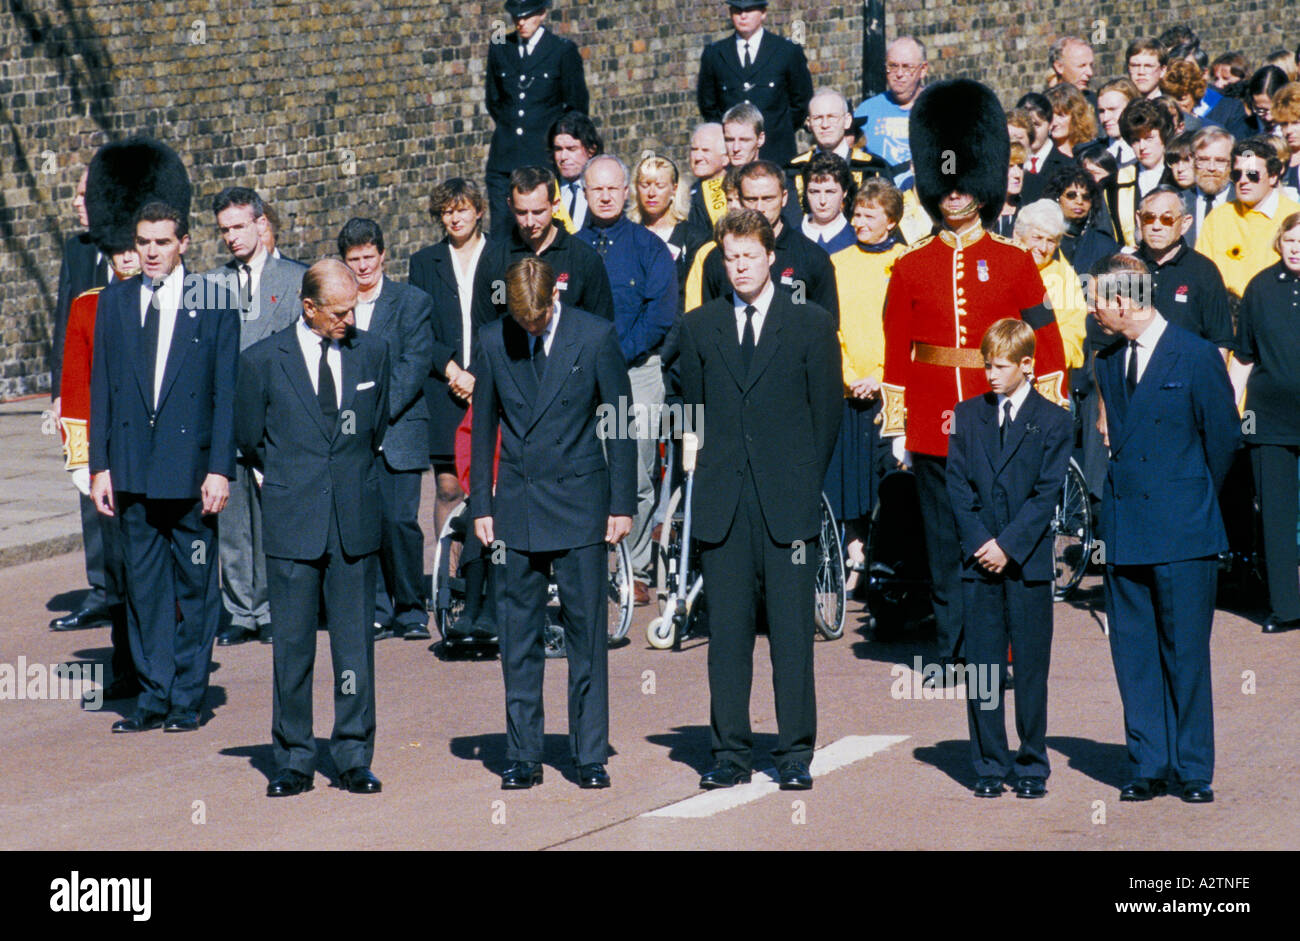 funeral of princess diana central london sept 1997 members of royal family lord charles althorp 1997 Stock Photo